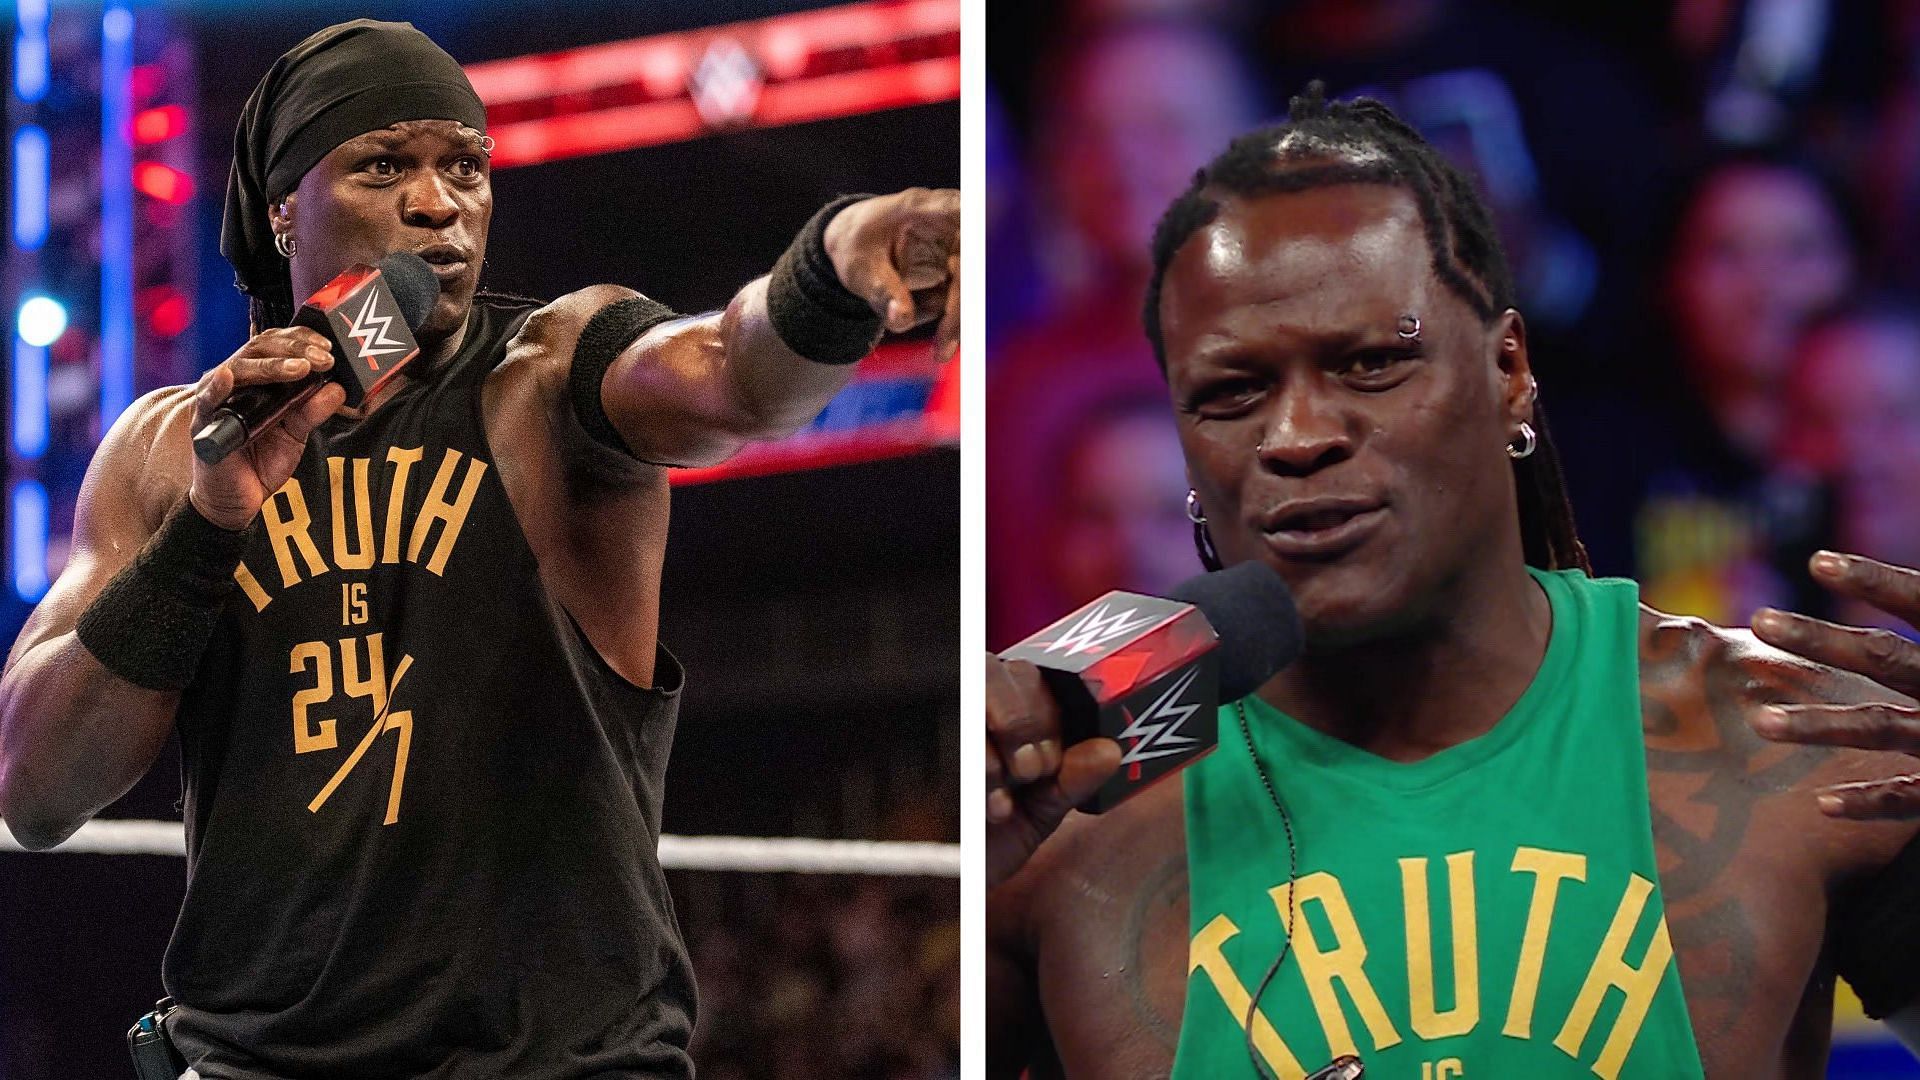 R-Truth has been absent from WWE programming for quite some time